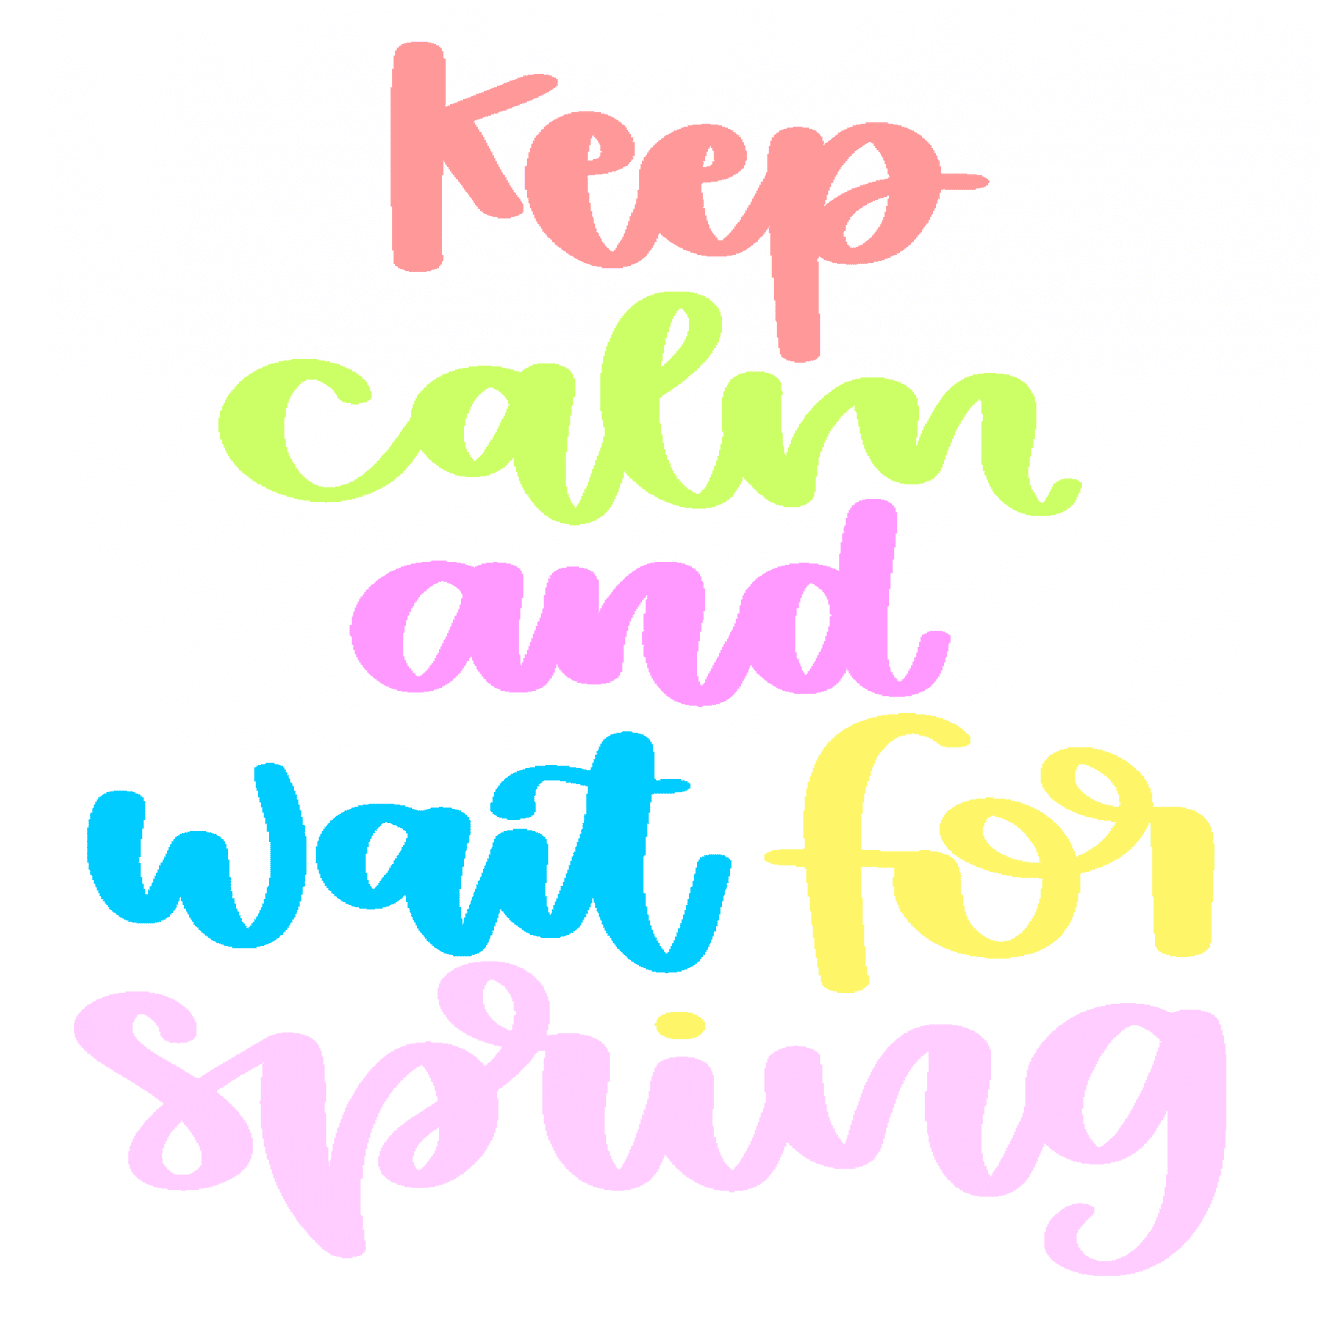 Keep_calm_and_wait_for_spring